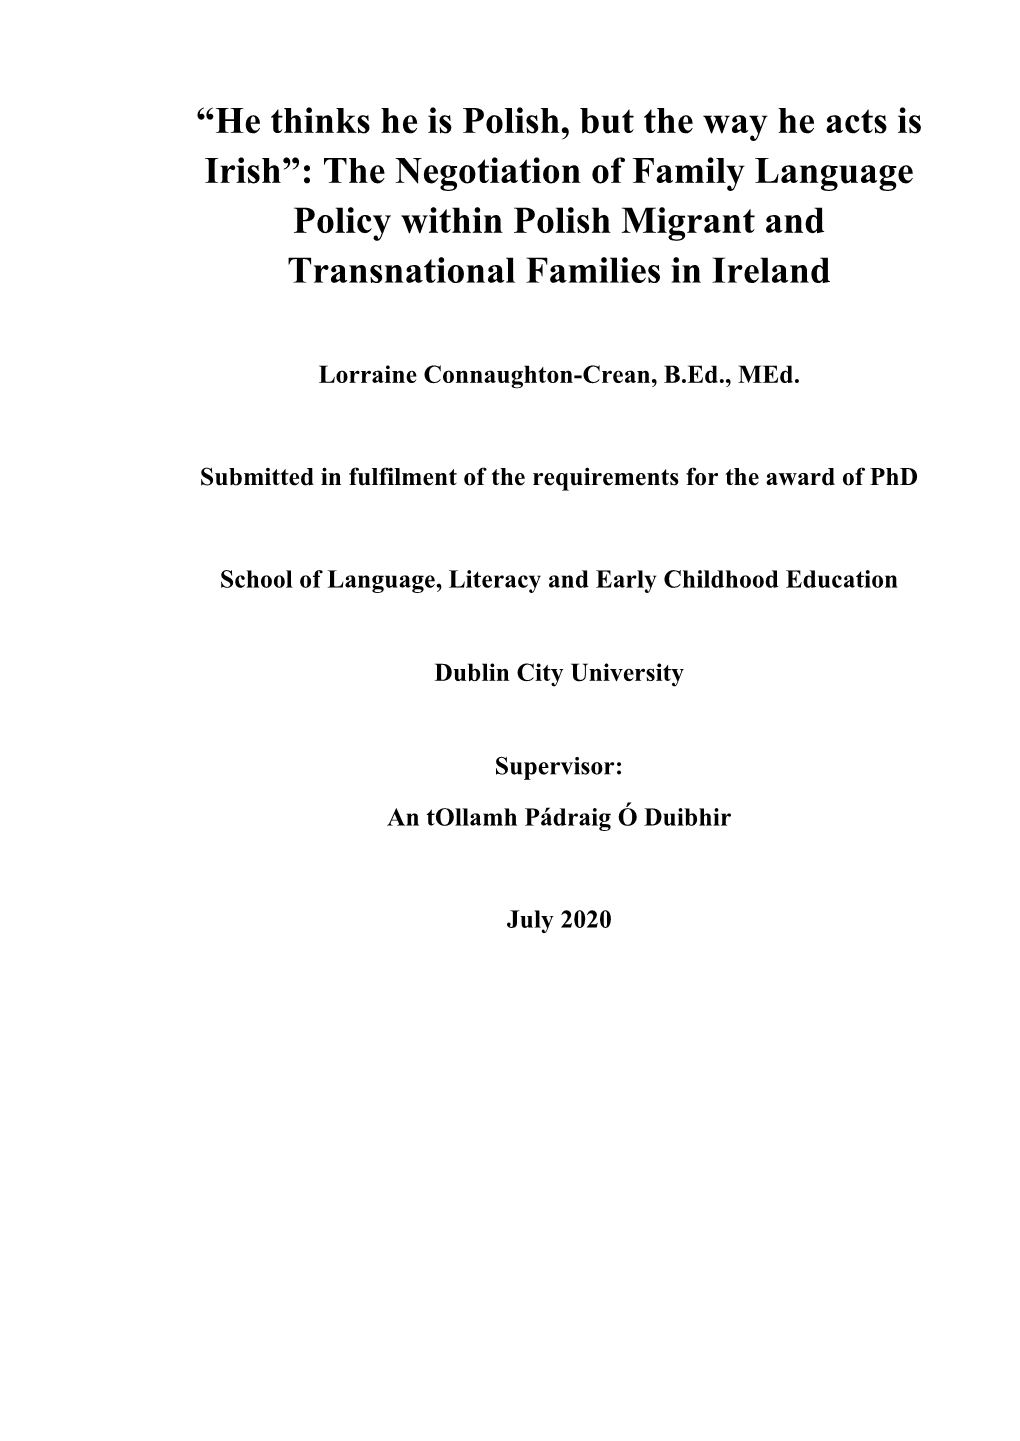 “He Thinks He Is Polish, but the Way He Acts Is Irish”: the Negotiation of Family Language Policy Within Polish Migrant and Transnational Families in Ireland